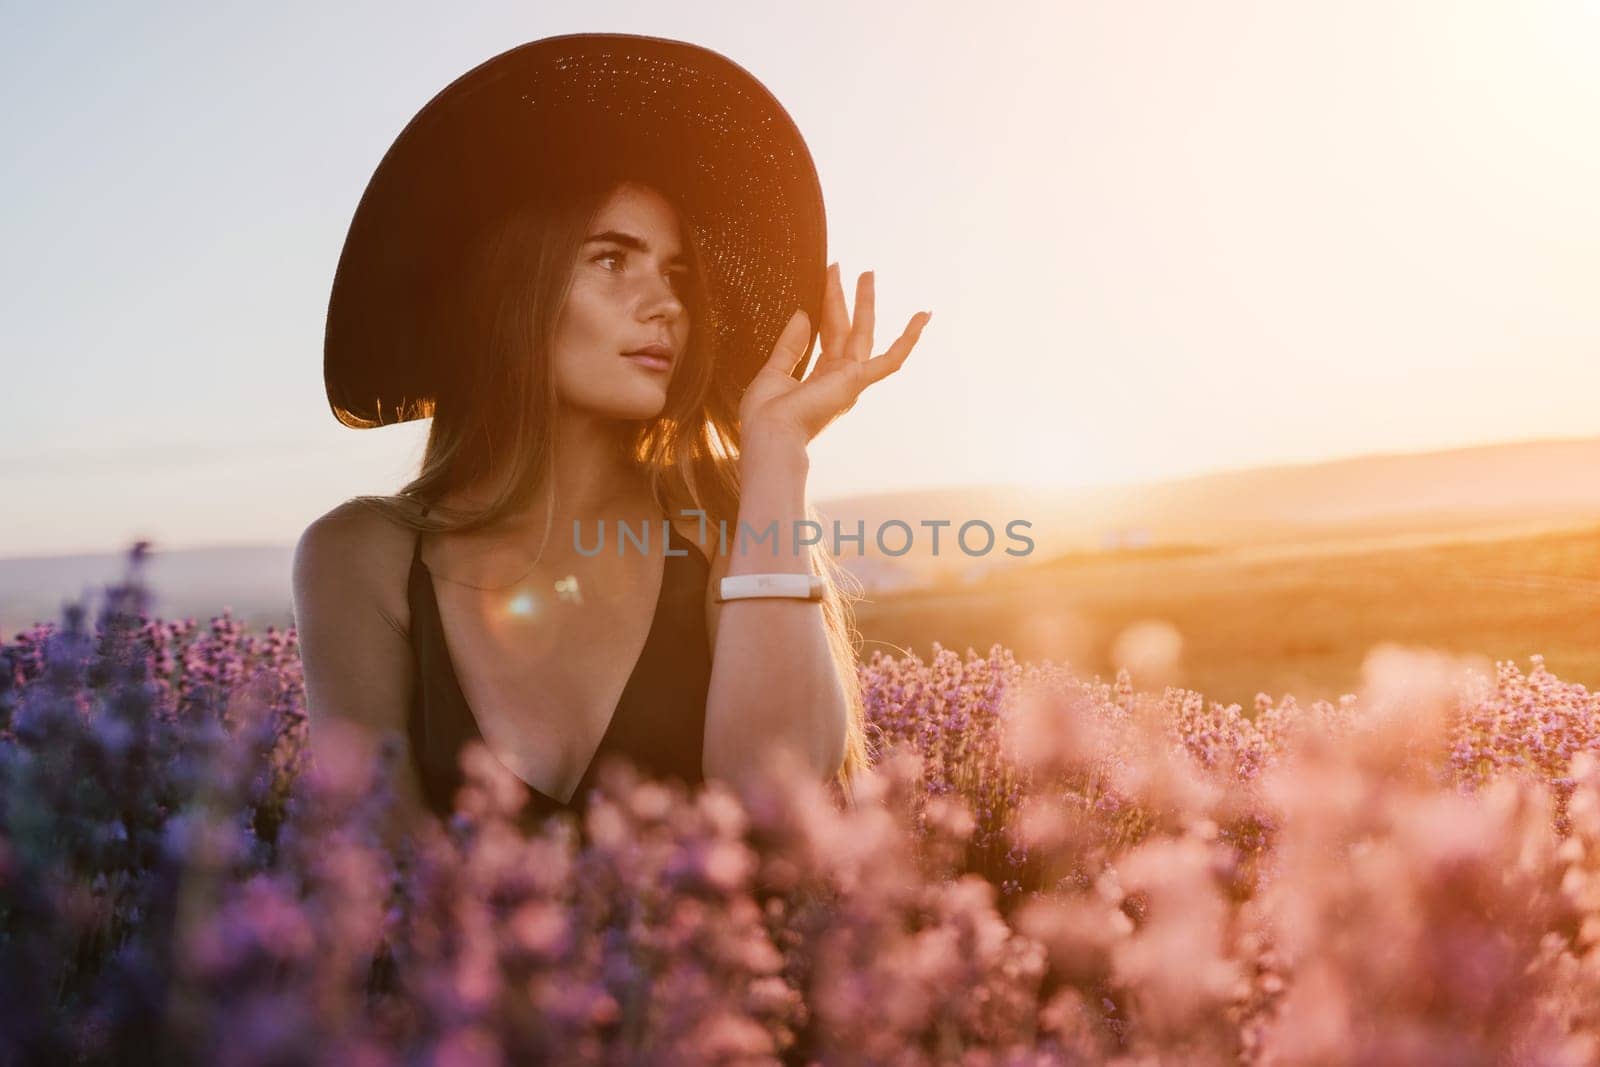 Woman lavender field. Happy carefree woman in black dress and hat with large brim walking in a lavender field during sunset. Perfect for inspirational and warm concepts in travel and wanderlust. by panophotograph